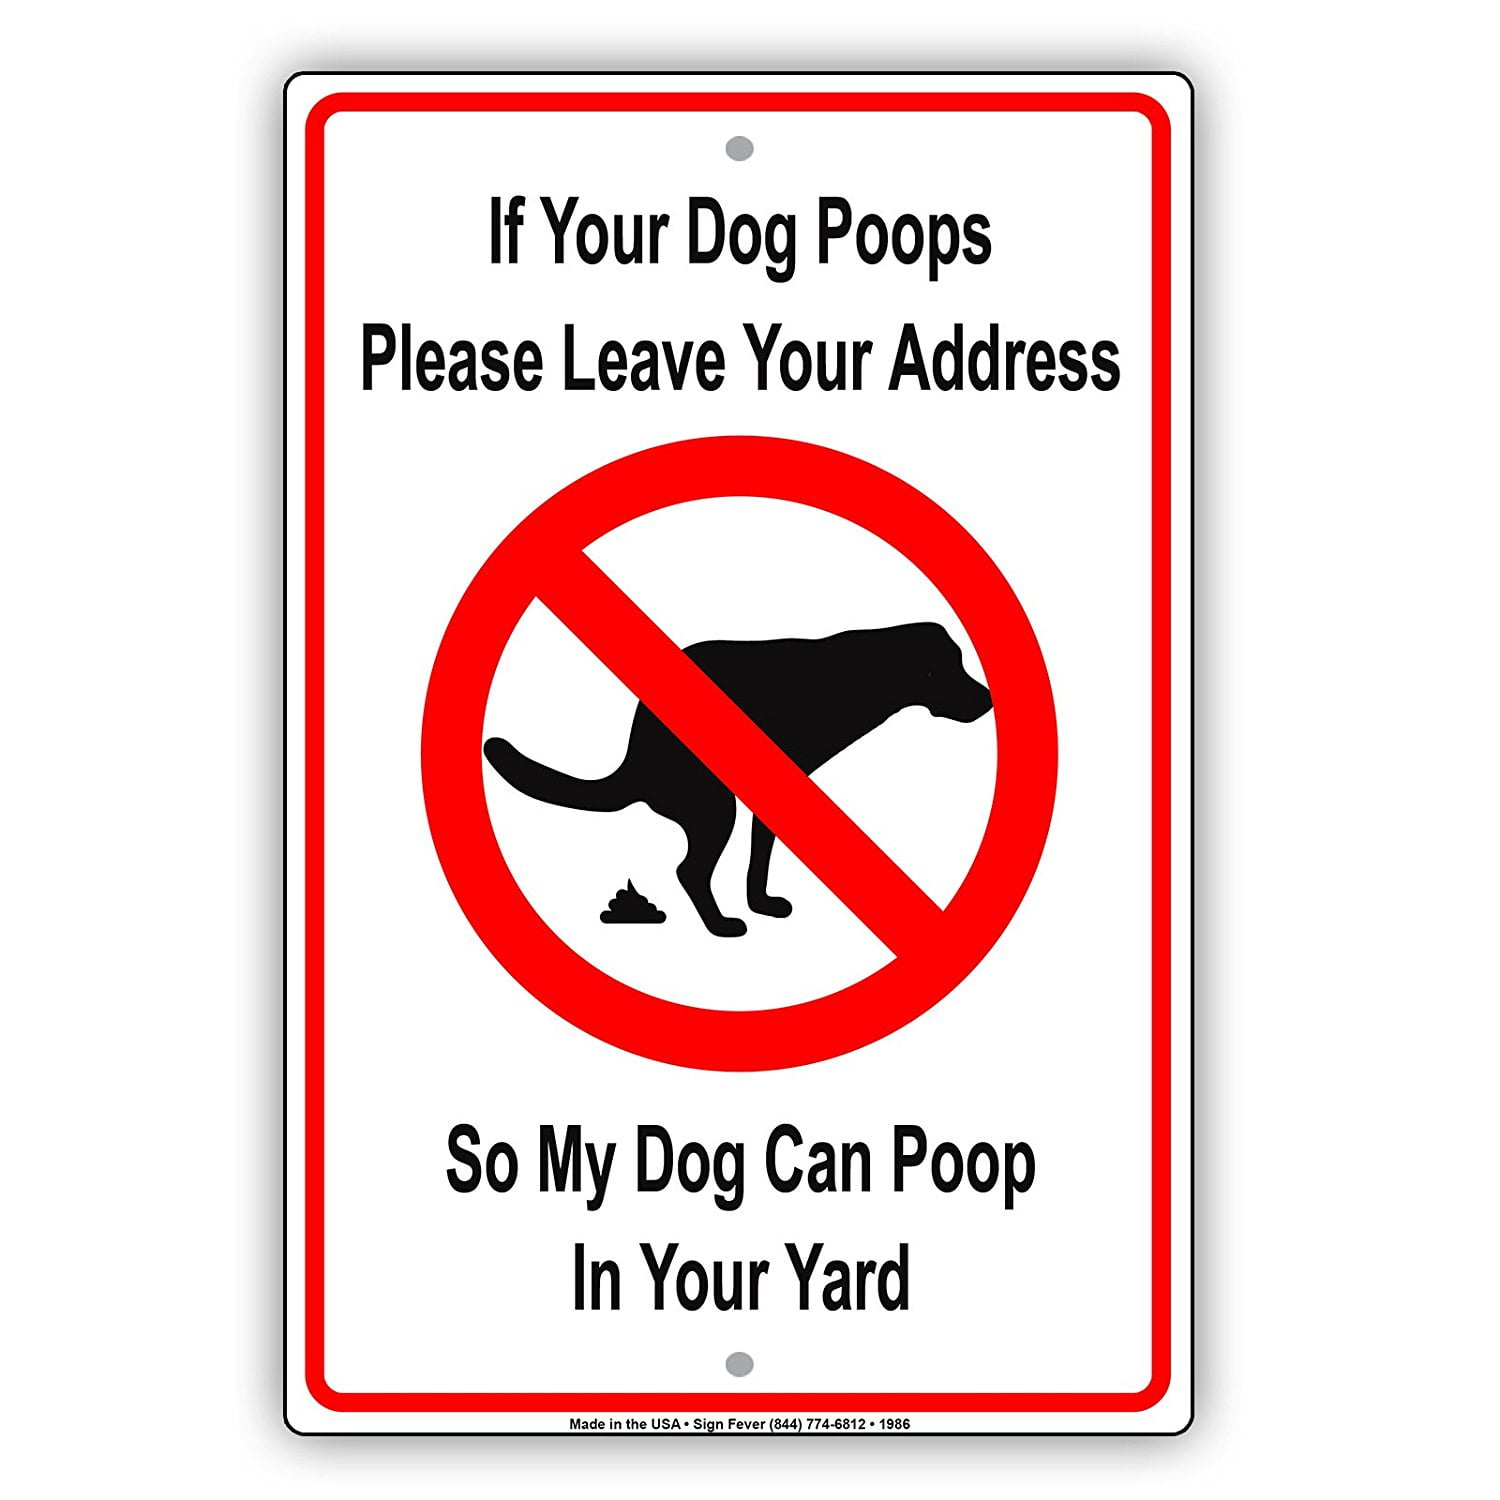 Please Leave Your Address Aluminum No Dog Pooping Sign or Vinyl Sticker 